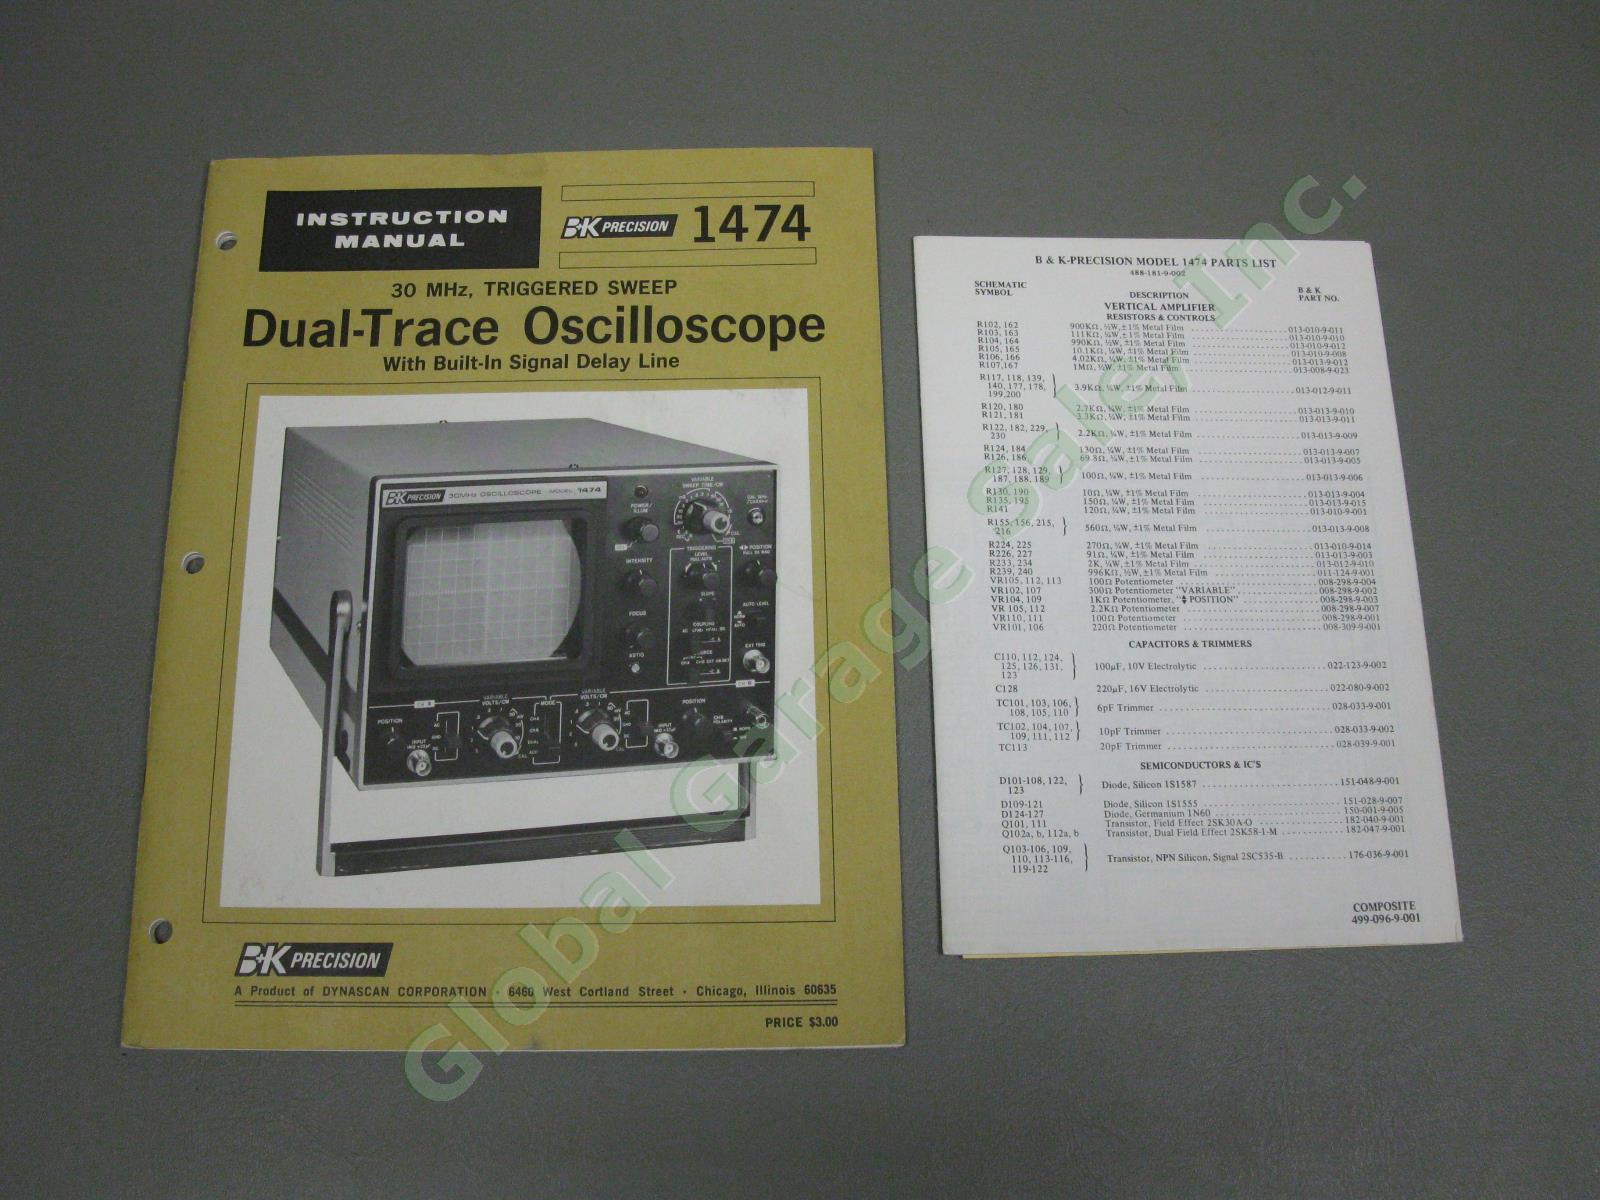 B&K Precision 1474 30MHz Triggered-Sweep Dual-Trace Oscilloscope Tested IWC NR 10